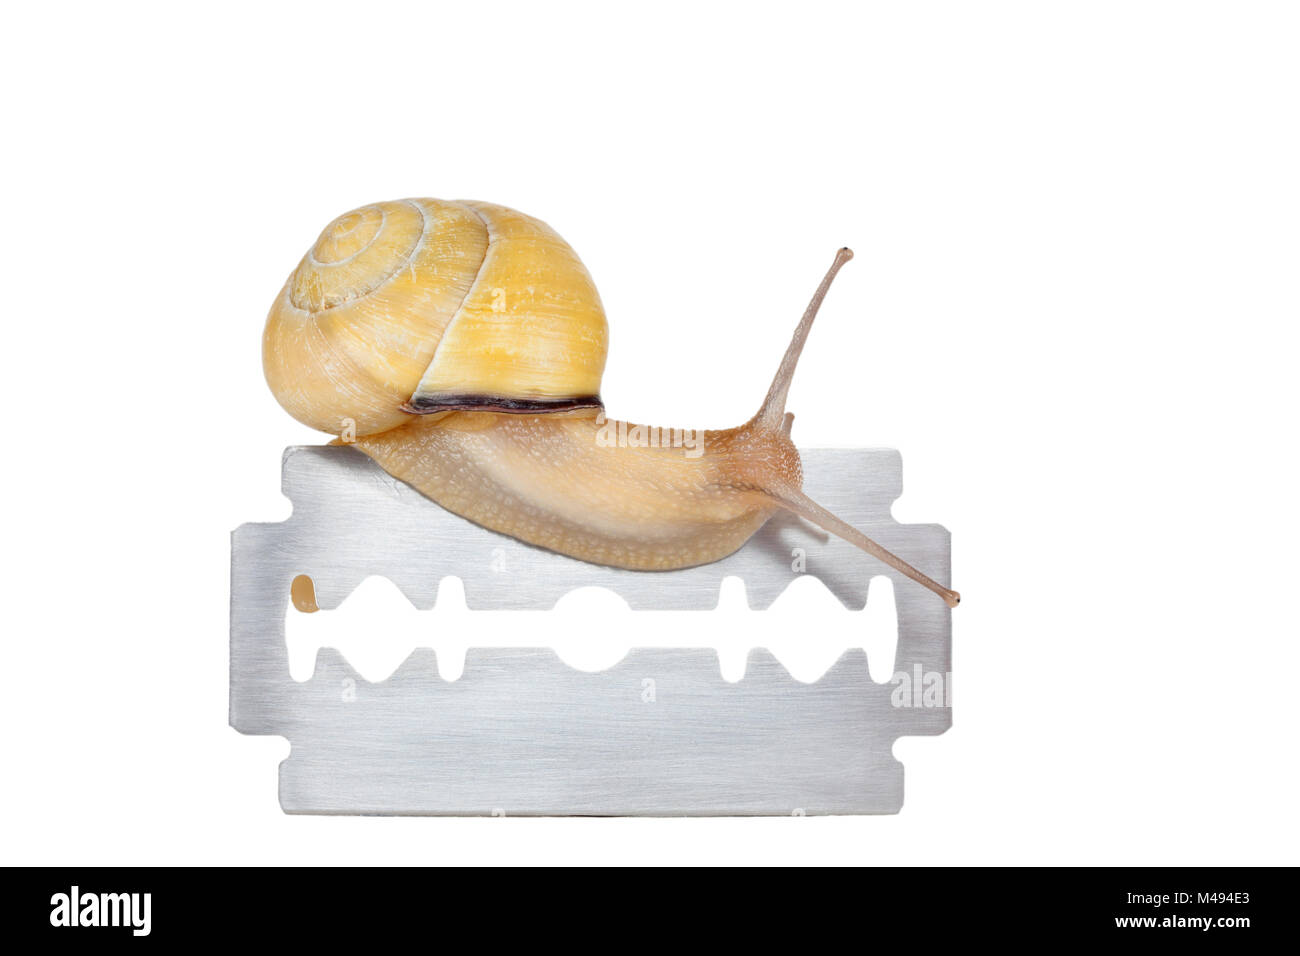 Land snail / Brown-lipped snail (Cepaea nemoralis) crawling over a razor blade. The constantly produced mucus is a protection shield between the sole of the snail and the razor blade whilst the snail remains unharmed. Germany. Captive. Stock Photo